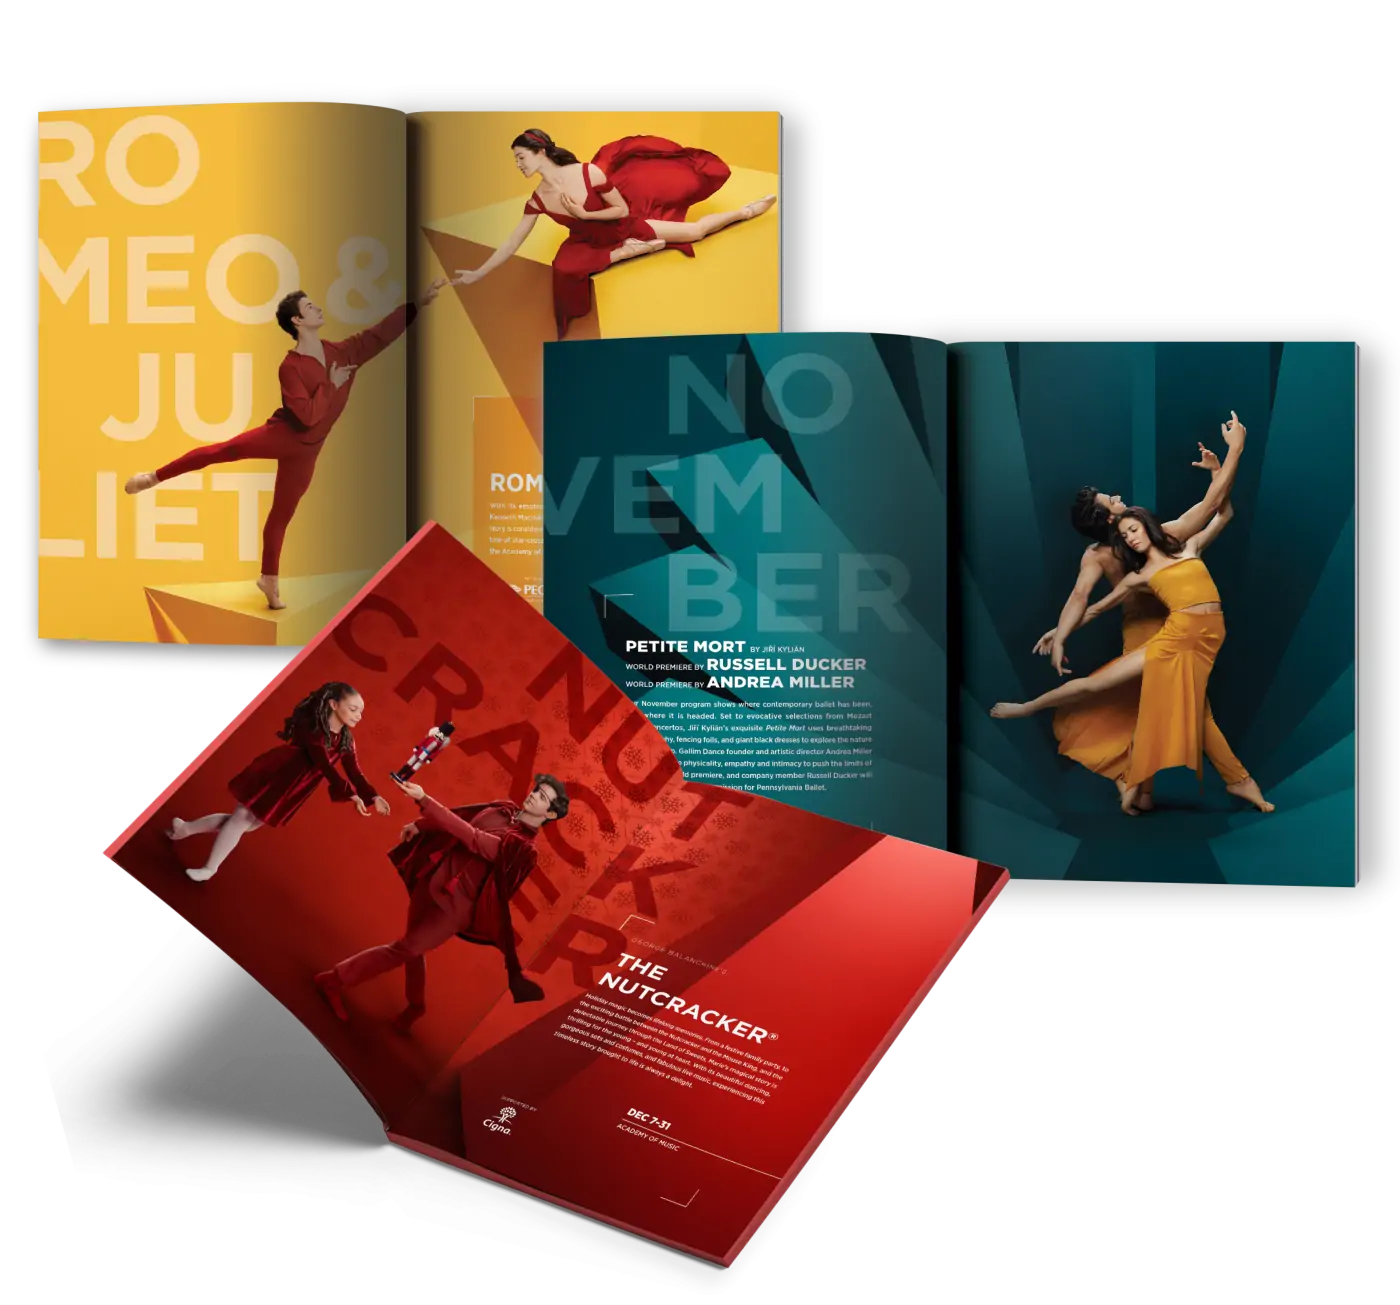 3 brochures for the Philadelphia Ballet featuring elements of the new creative direction that uses bold imagery and colors. Each brochure uses a different, vibrant color for the background to highlight the dancers such as gold, dark red, and turquoise.